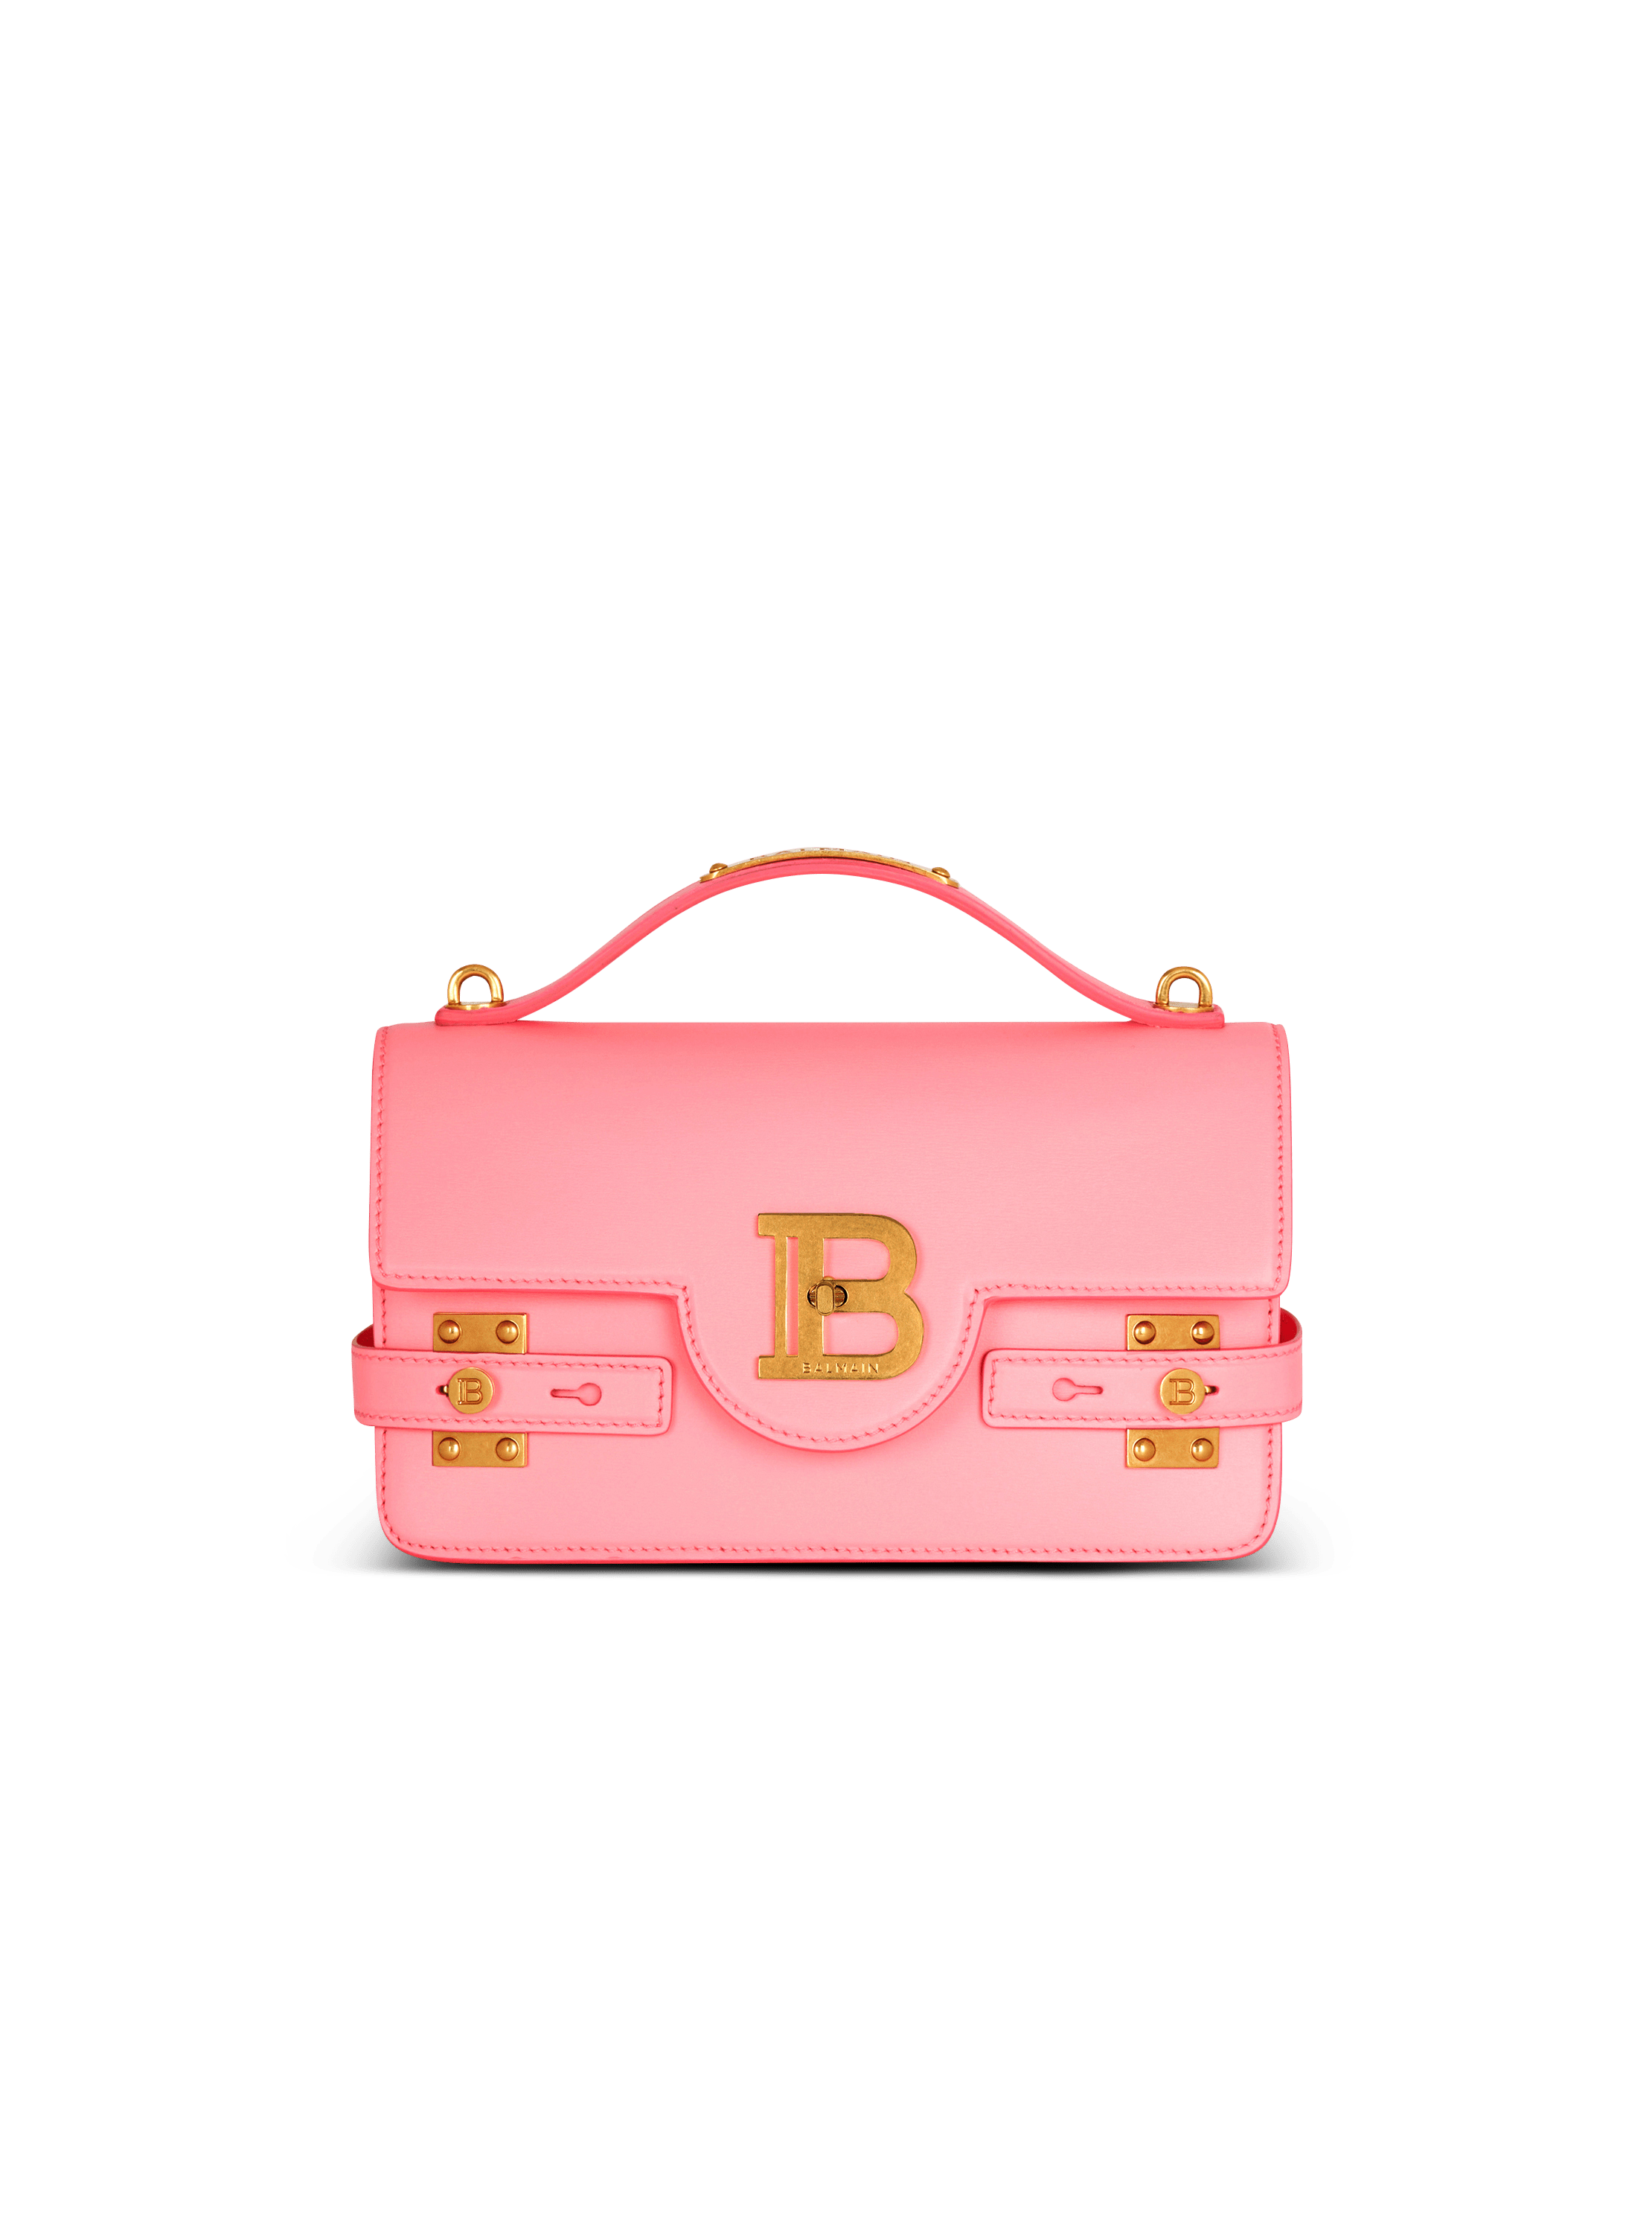 B-Buzz 24 grained leather bag